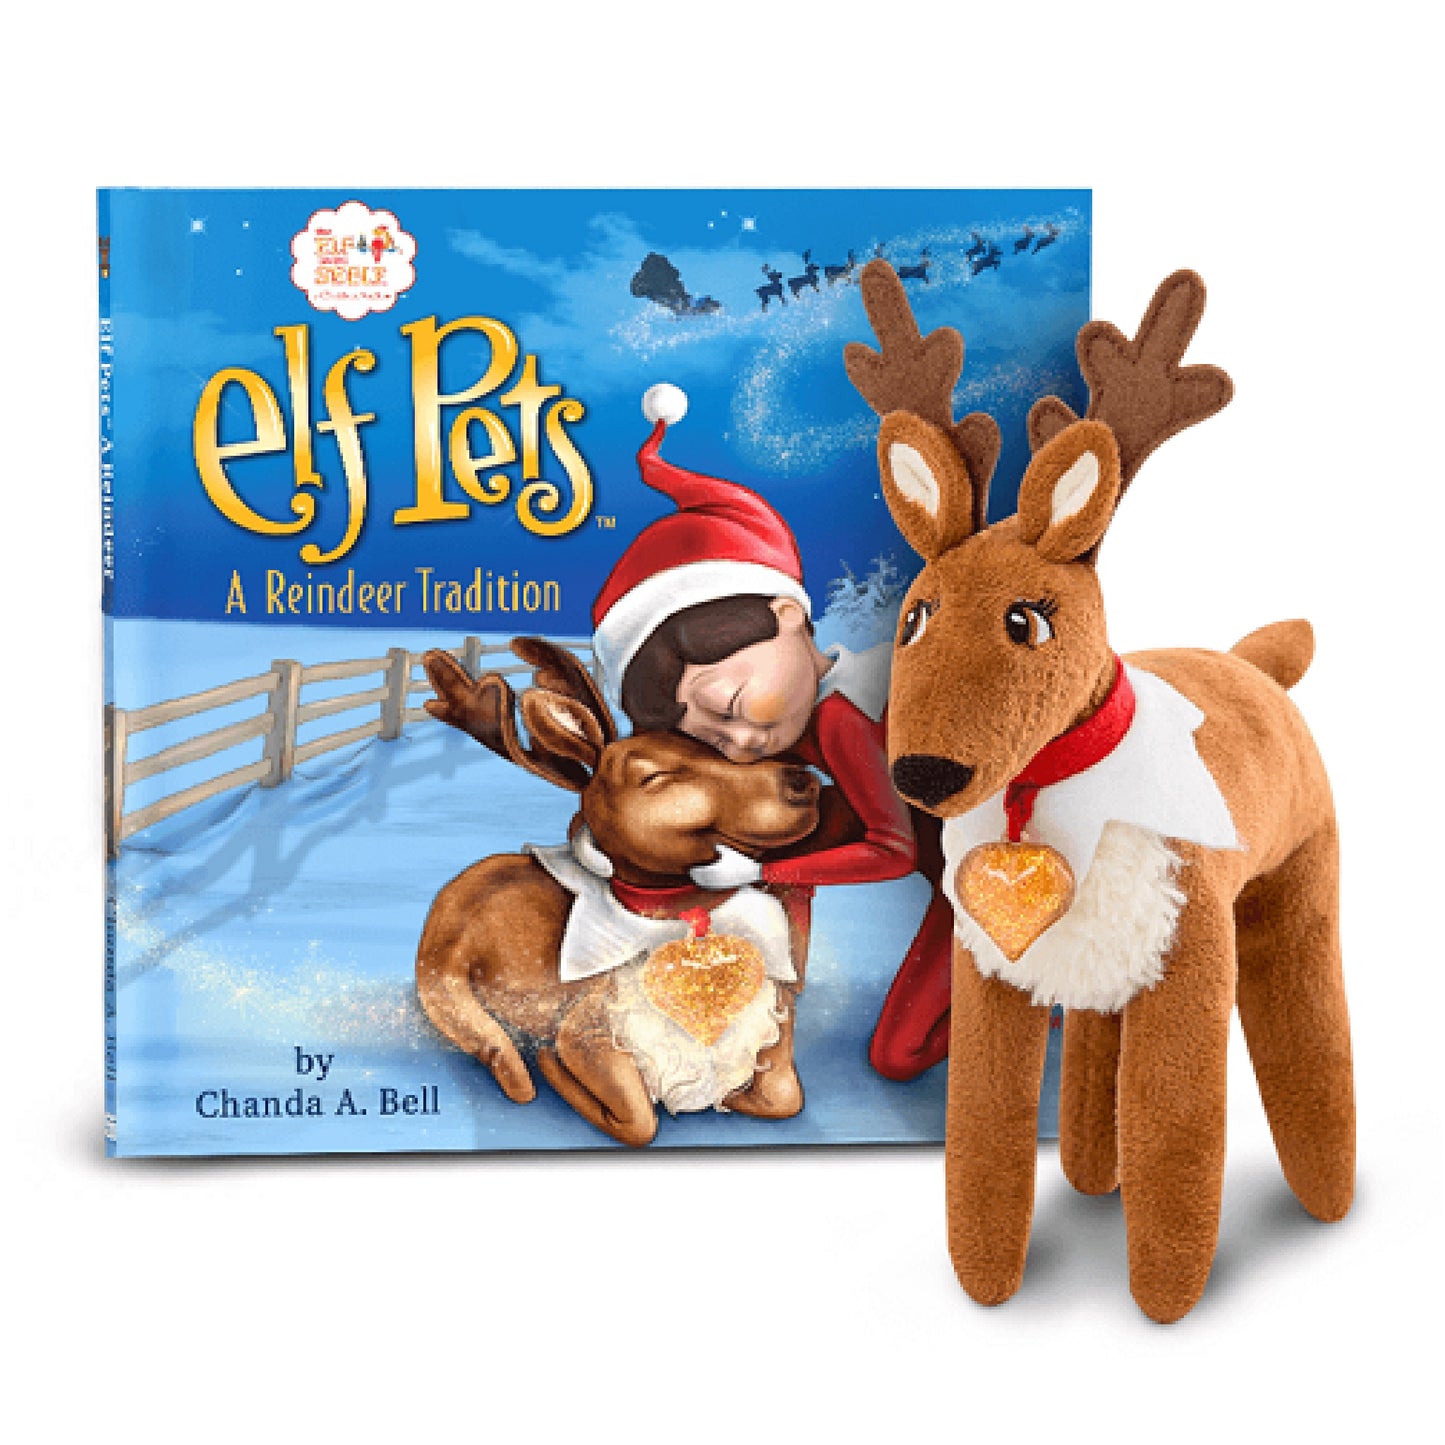 The Elf on the Shelf A Reindeer Tradition